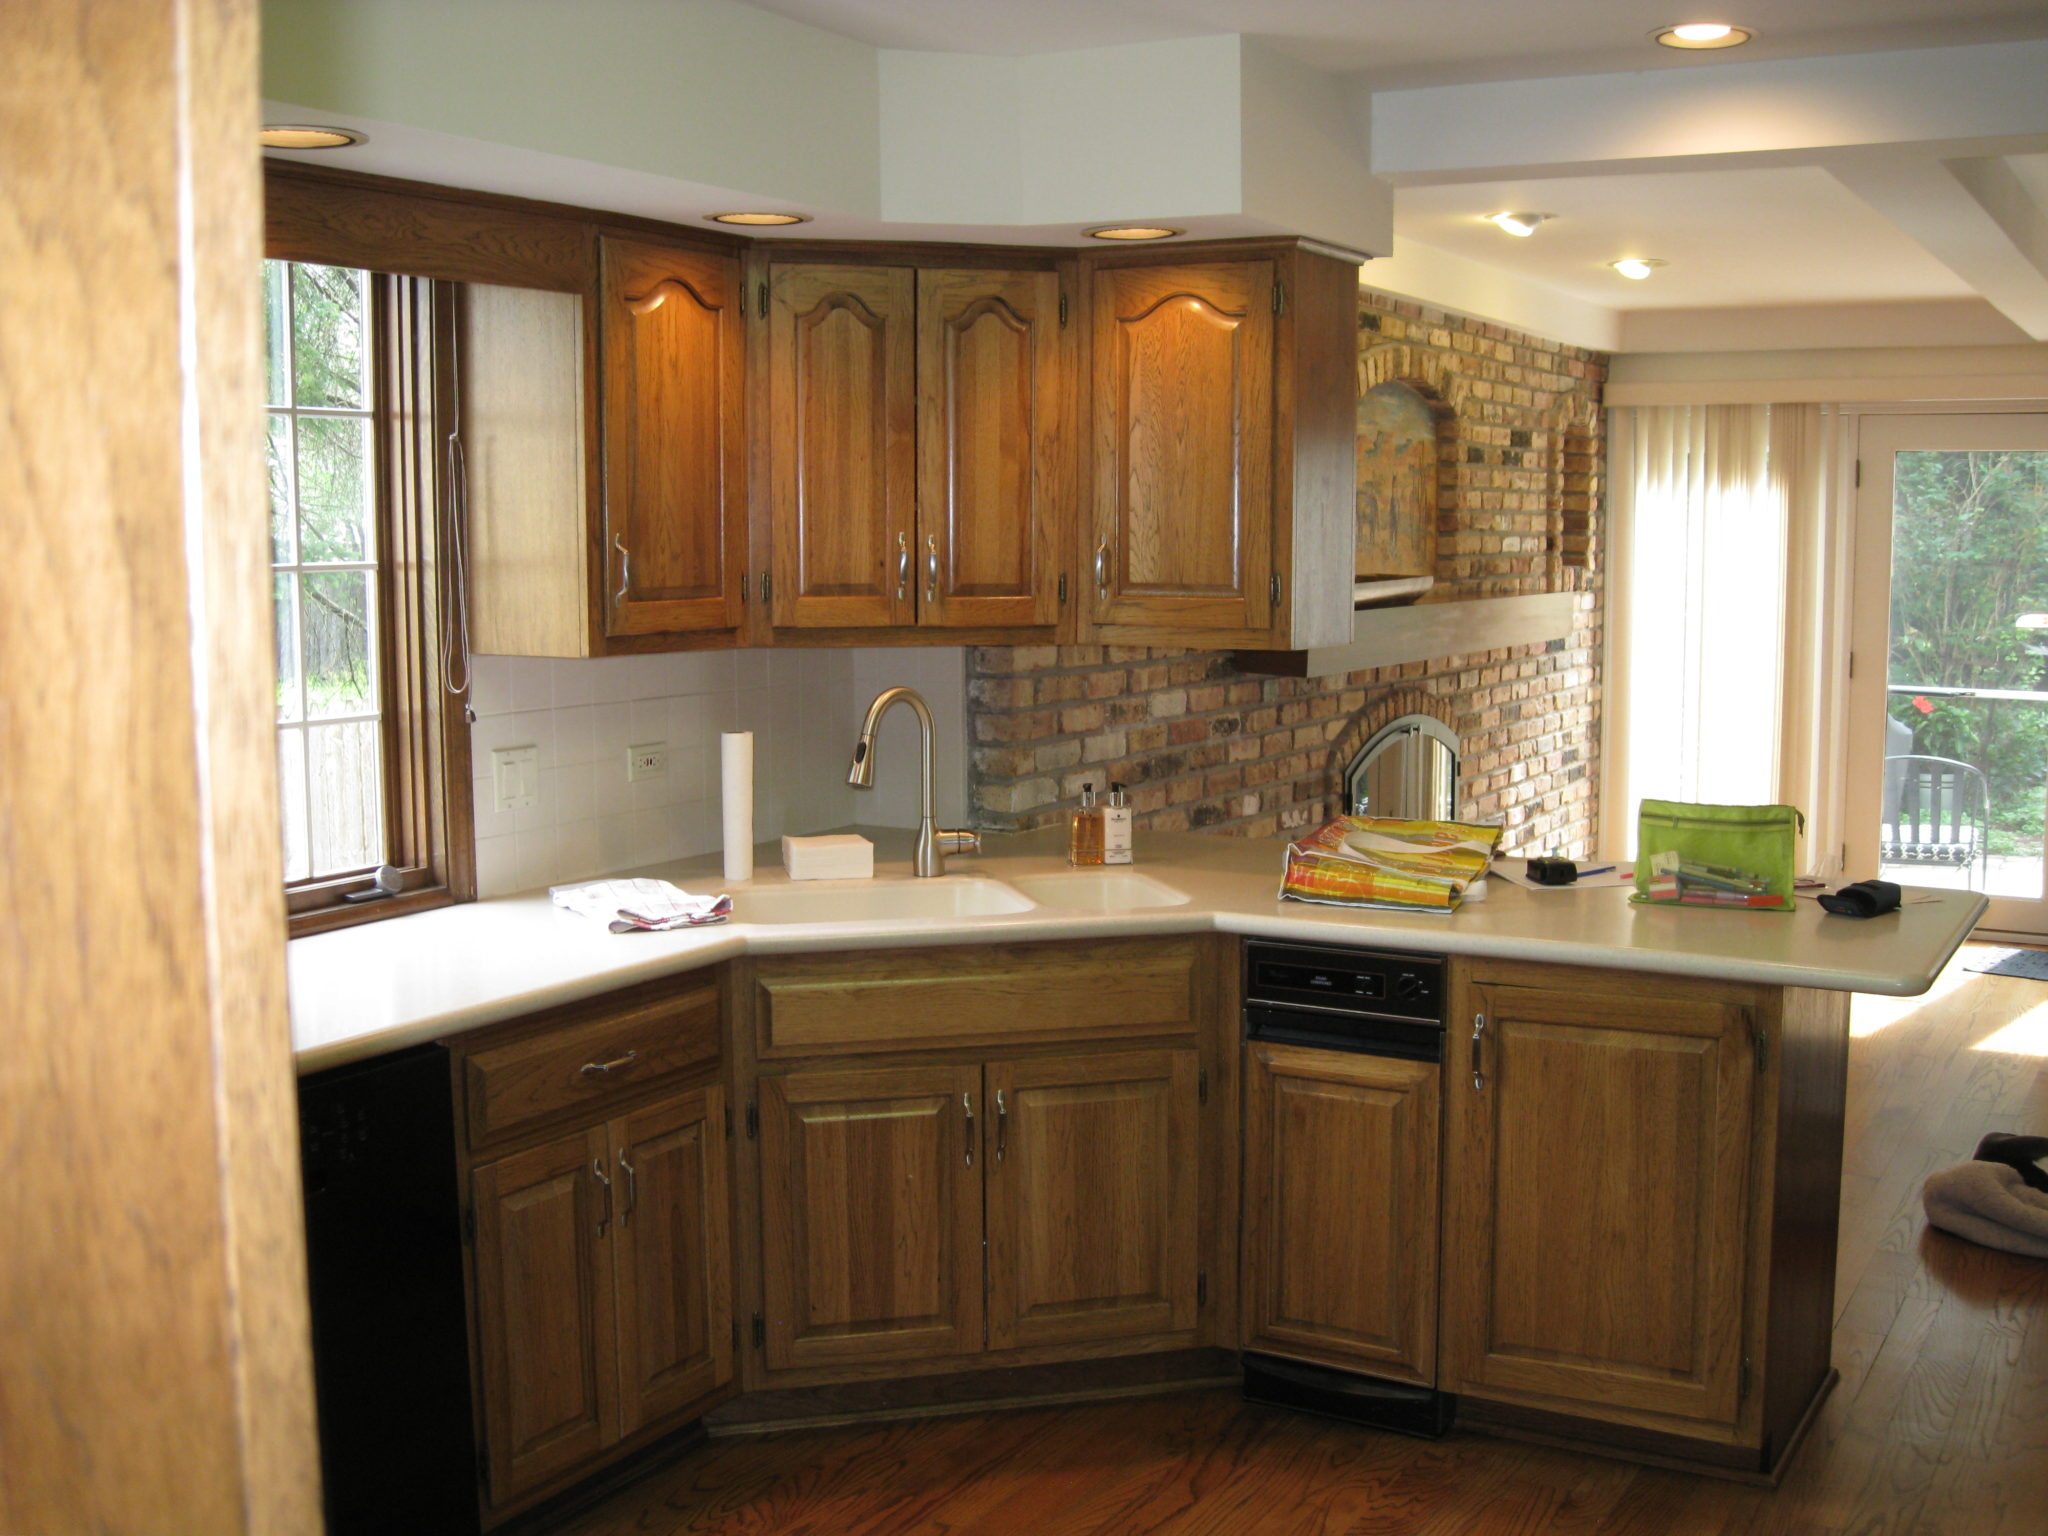 Open Concept L-Shaped Kitchen: Before and After | Drury Design